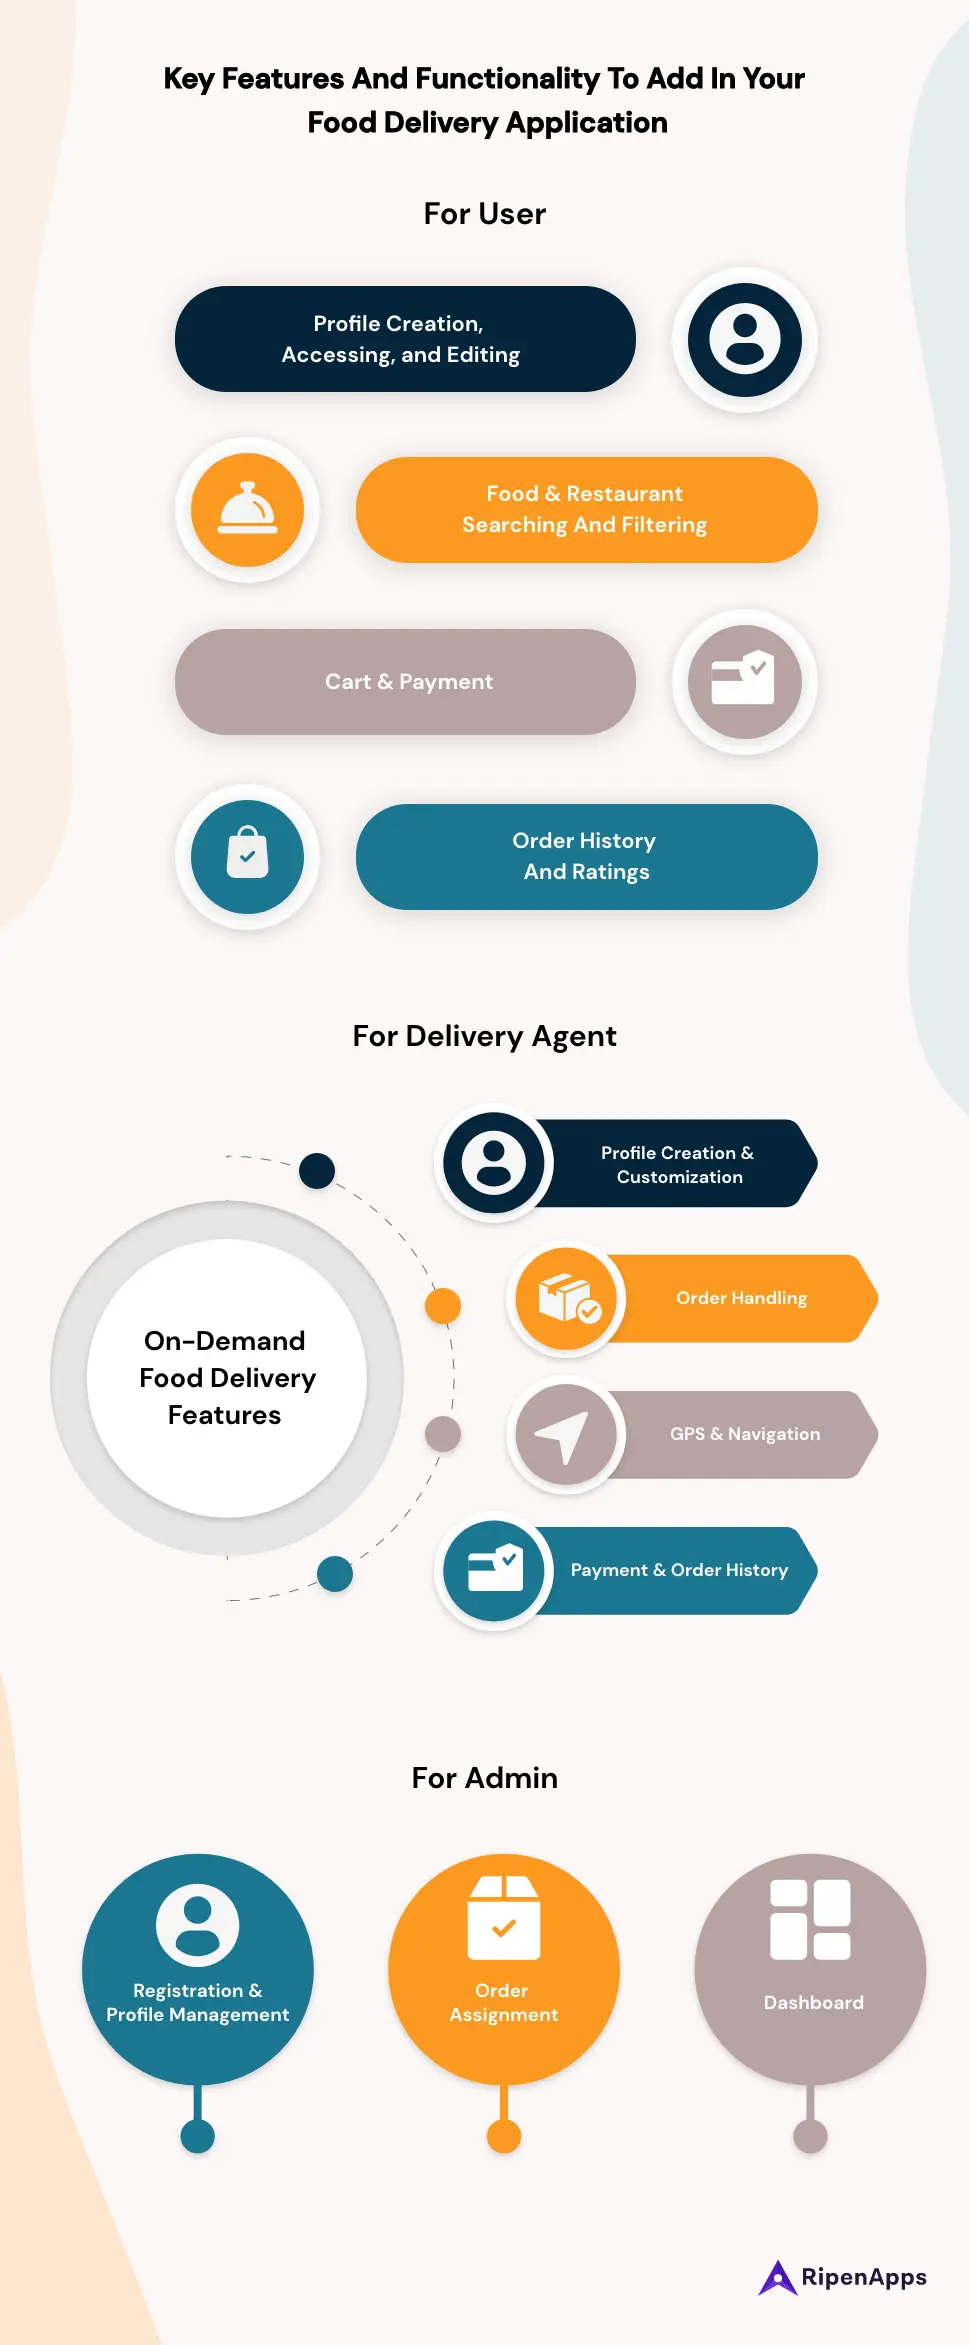 Key Features And Functionality To Add In Your Food Delivery Applicationinfo